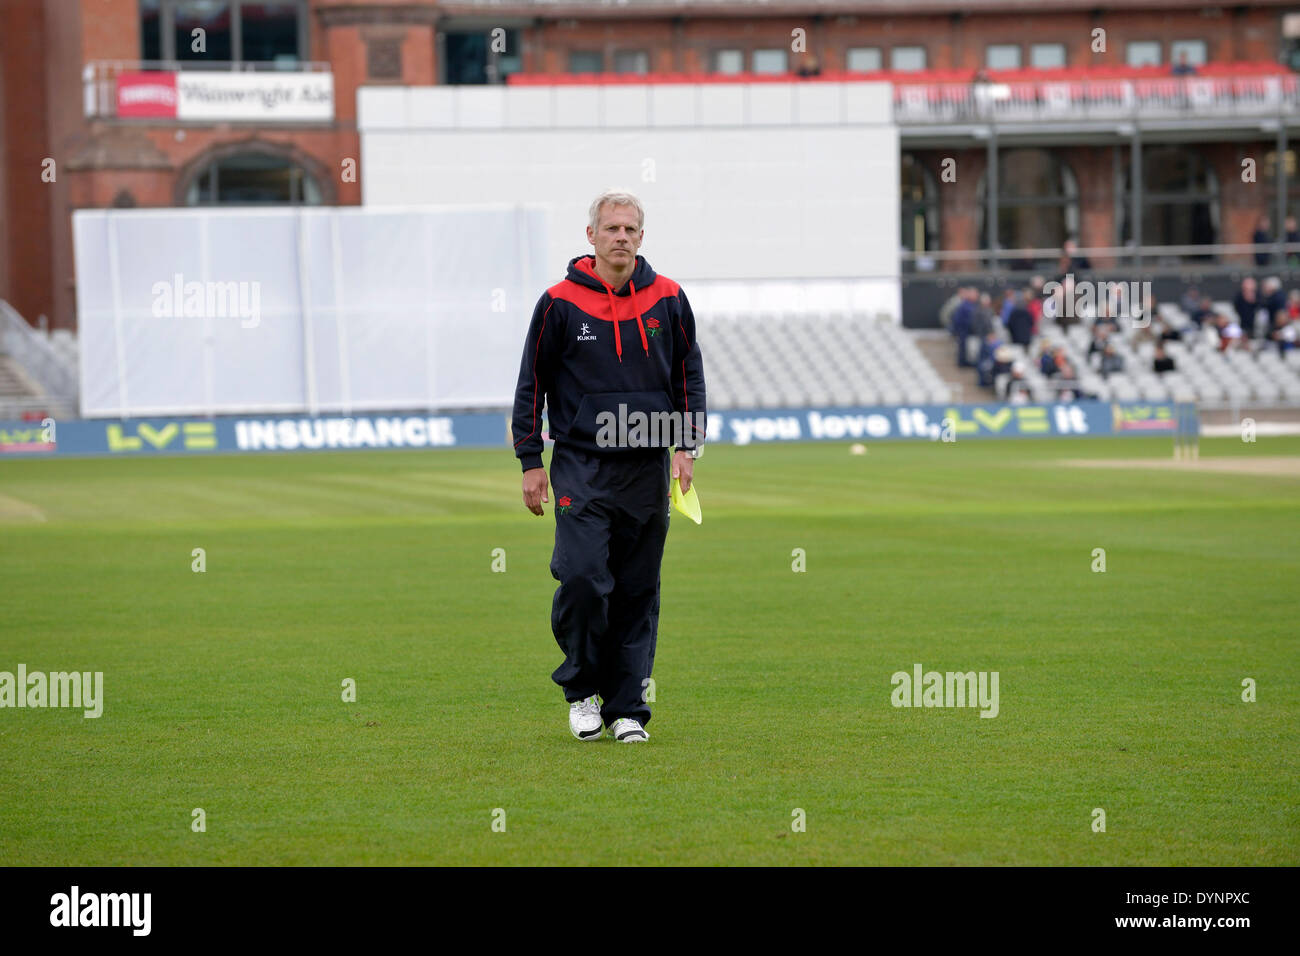 Manchester, UK. 23rd Apr, 2014. Peter Moores, the head coach at Lancashire County Cricket Club walks across the ground on the morning of the final day of the match against Warwickshire before taking up his new post as manager of the England Cricket Team. Peter Moores Last Match As Lancashire Coach Manchester, UK 23rd April 2014 Credit:  John Fryer/Alamy Live News Stock Photo